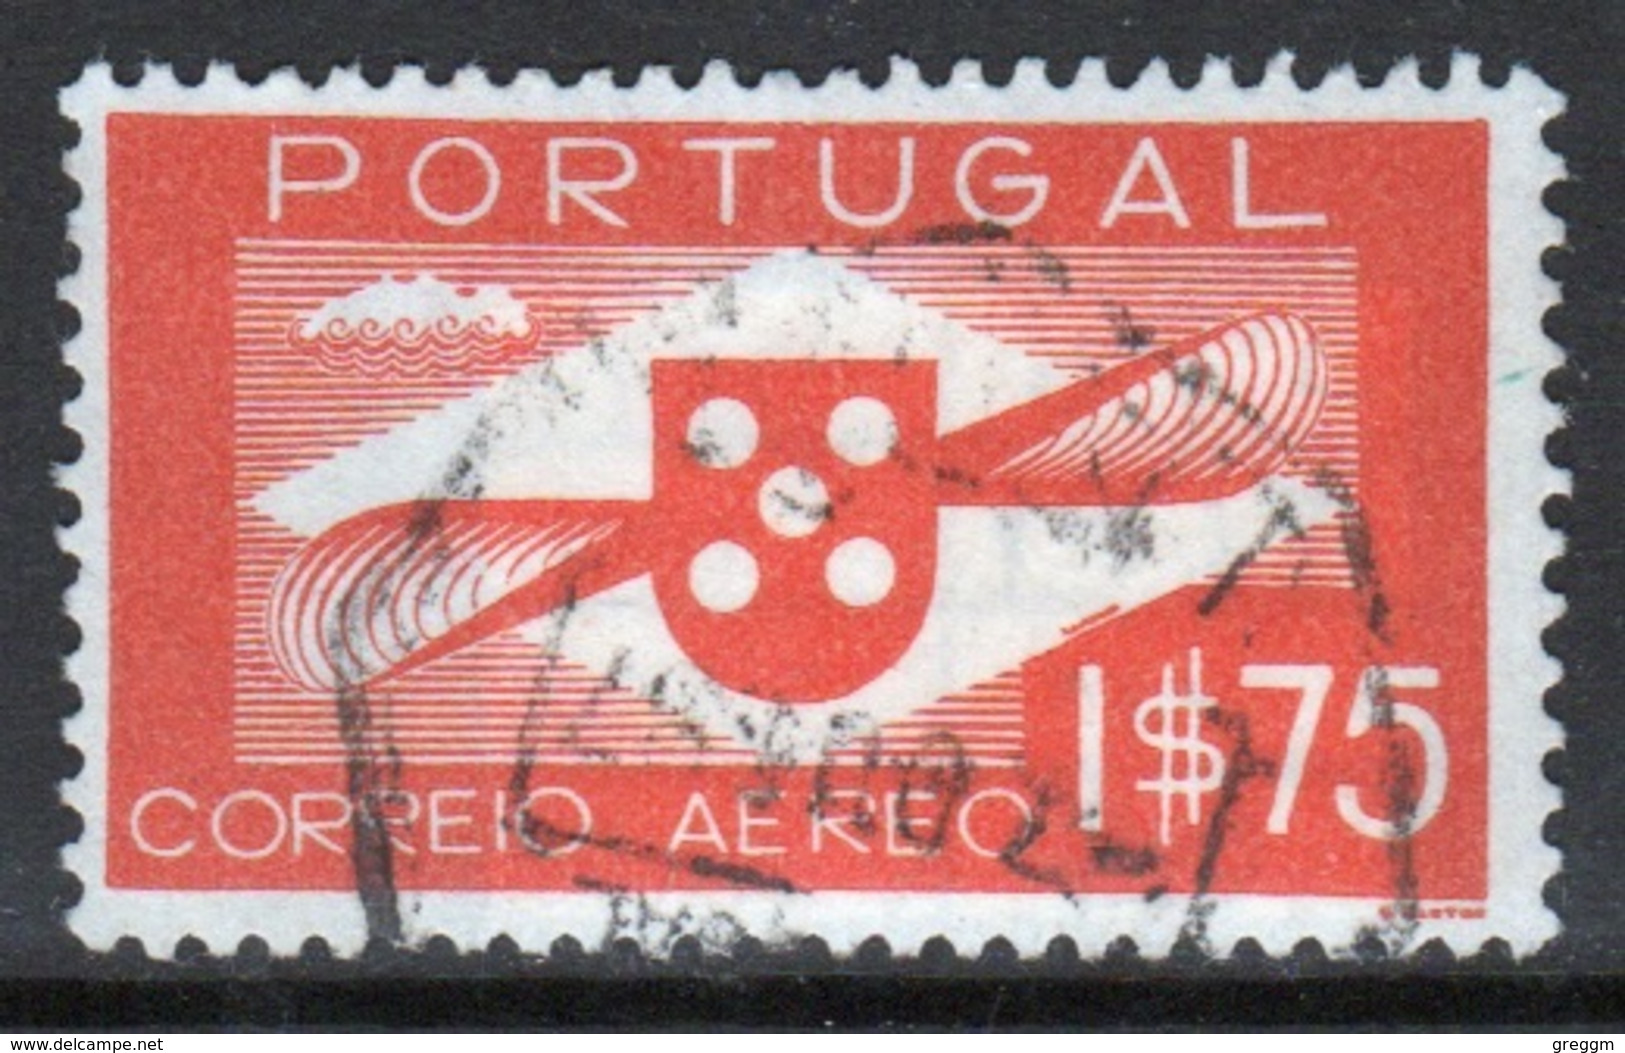 Portugal 1937 A Single $1.75  Stamp Used For AirMail. - Usado